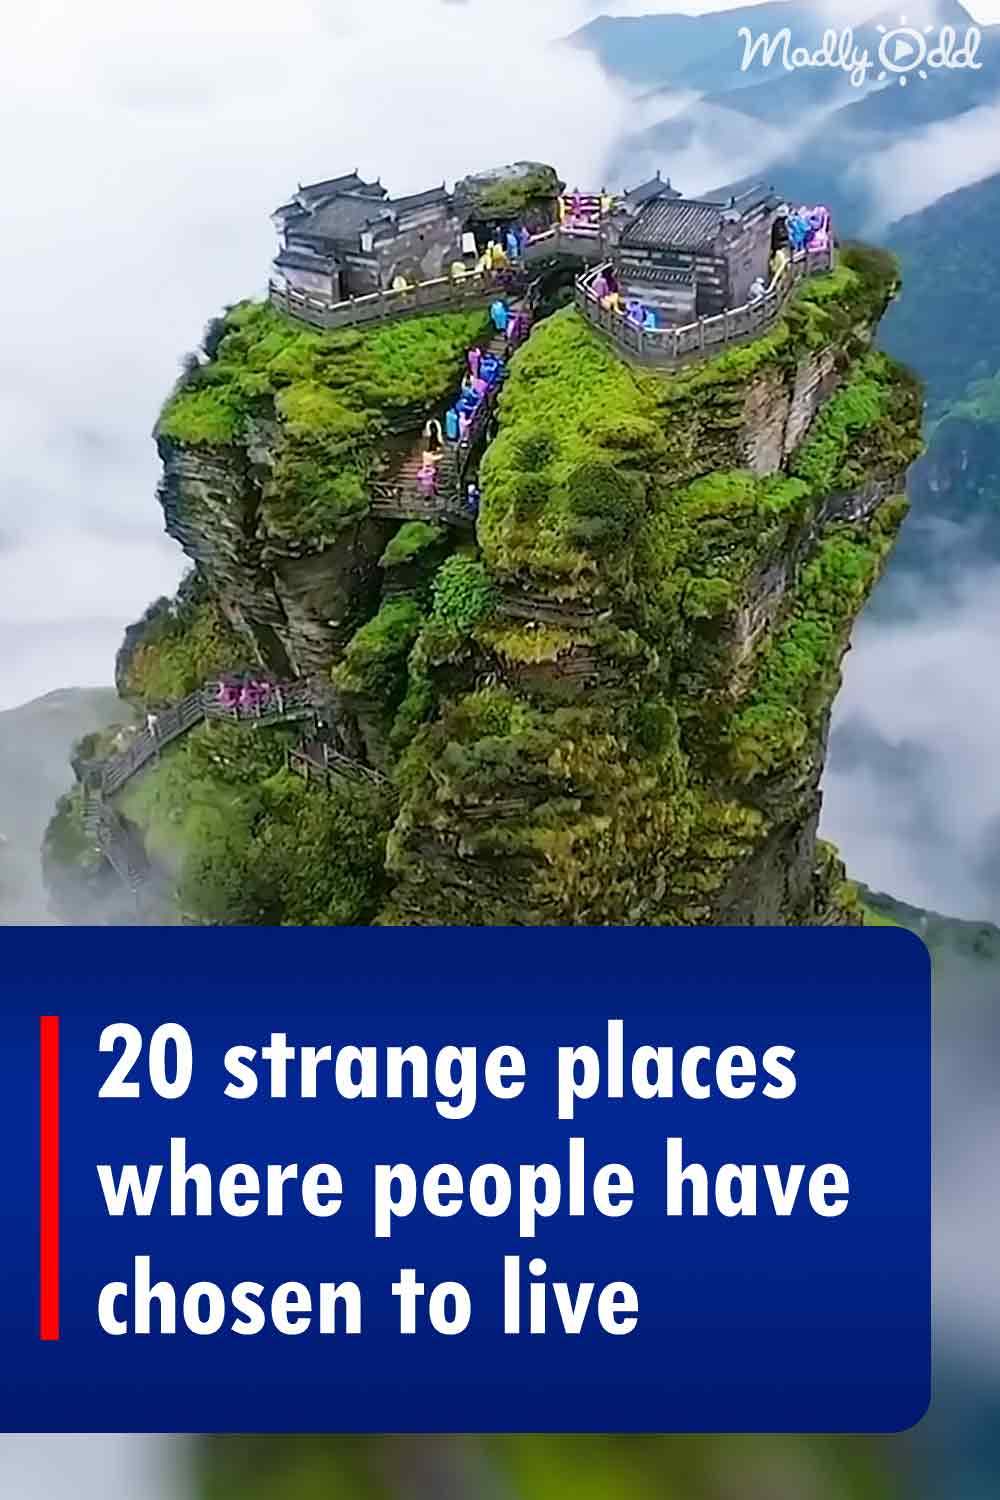 20 strange places where people have chosen to live